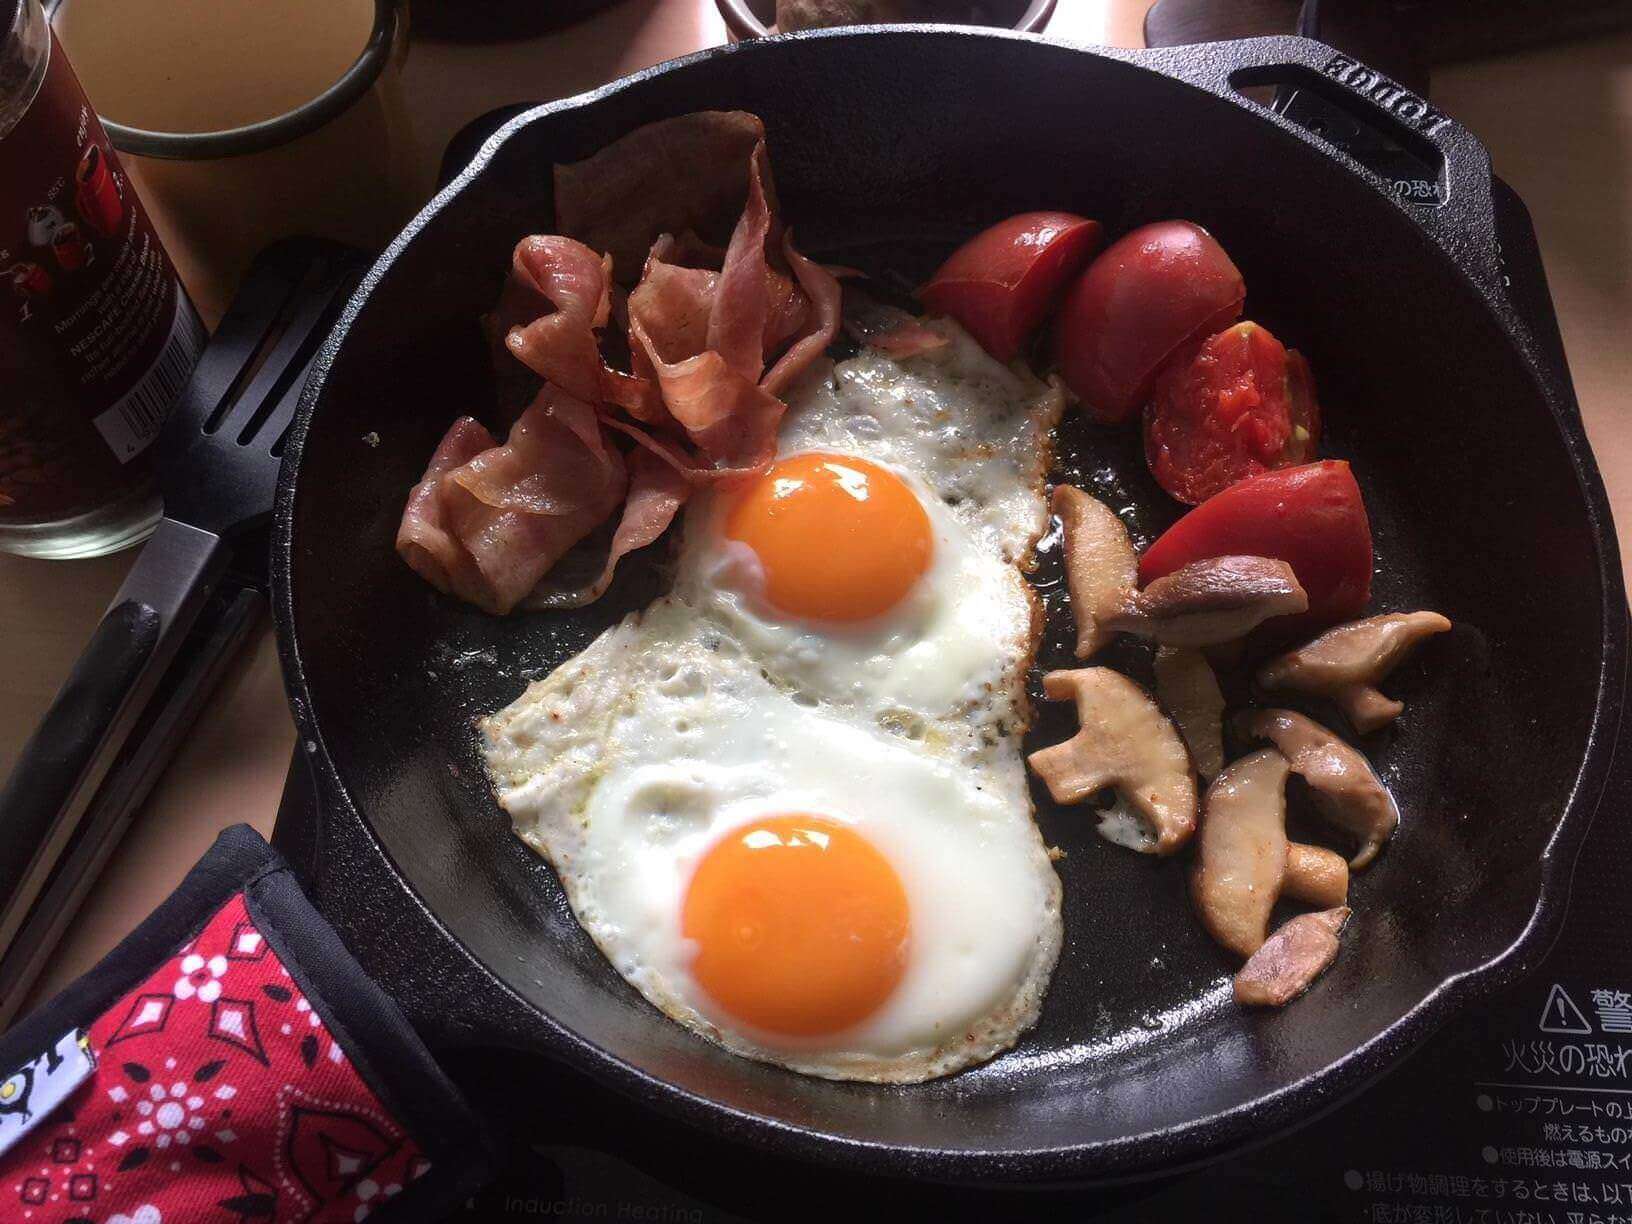 Cast iron cookware. Skillet with English breakfast